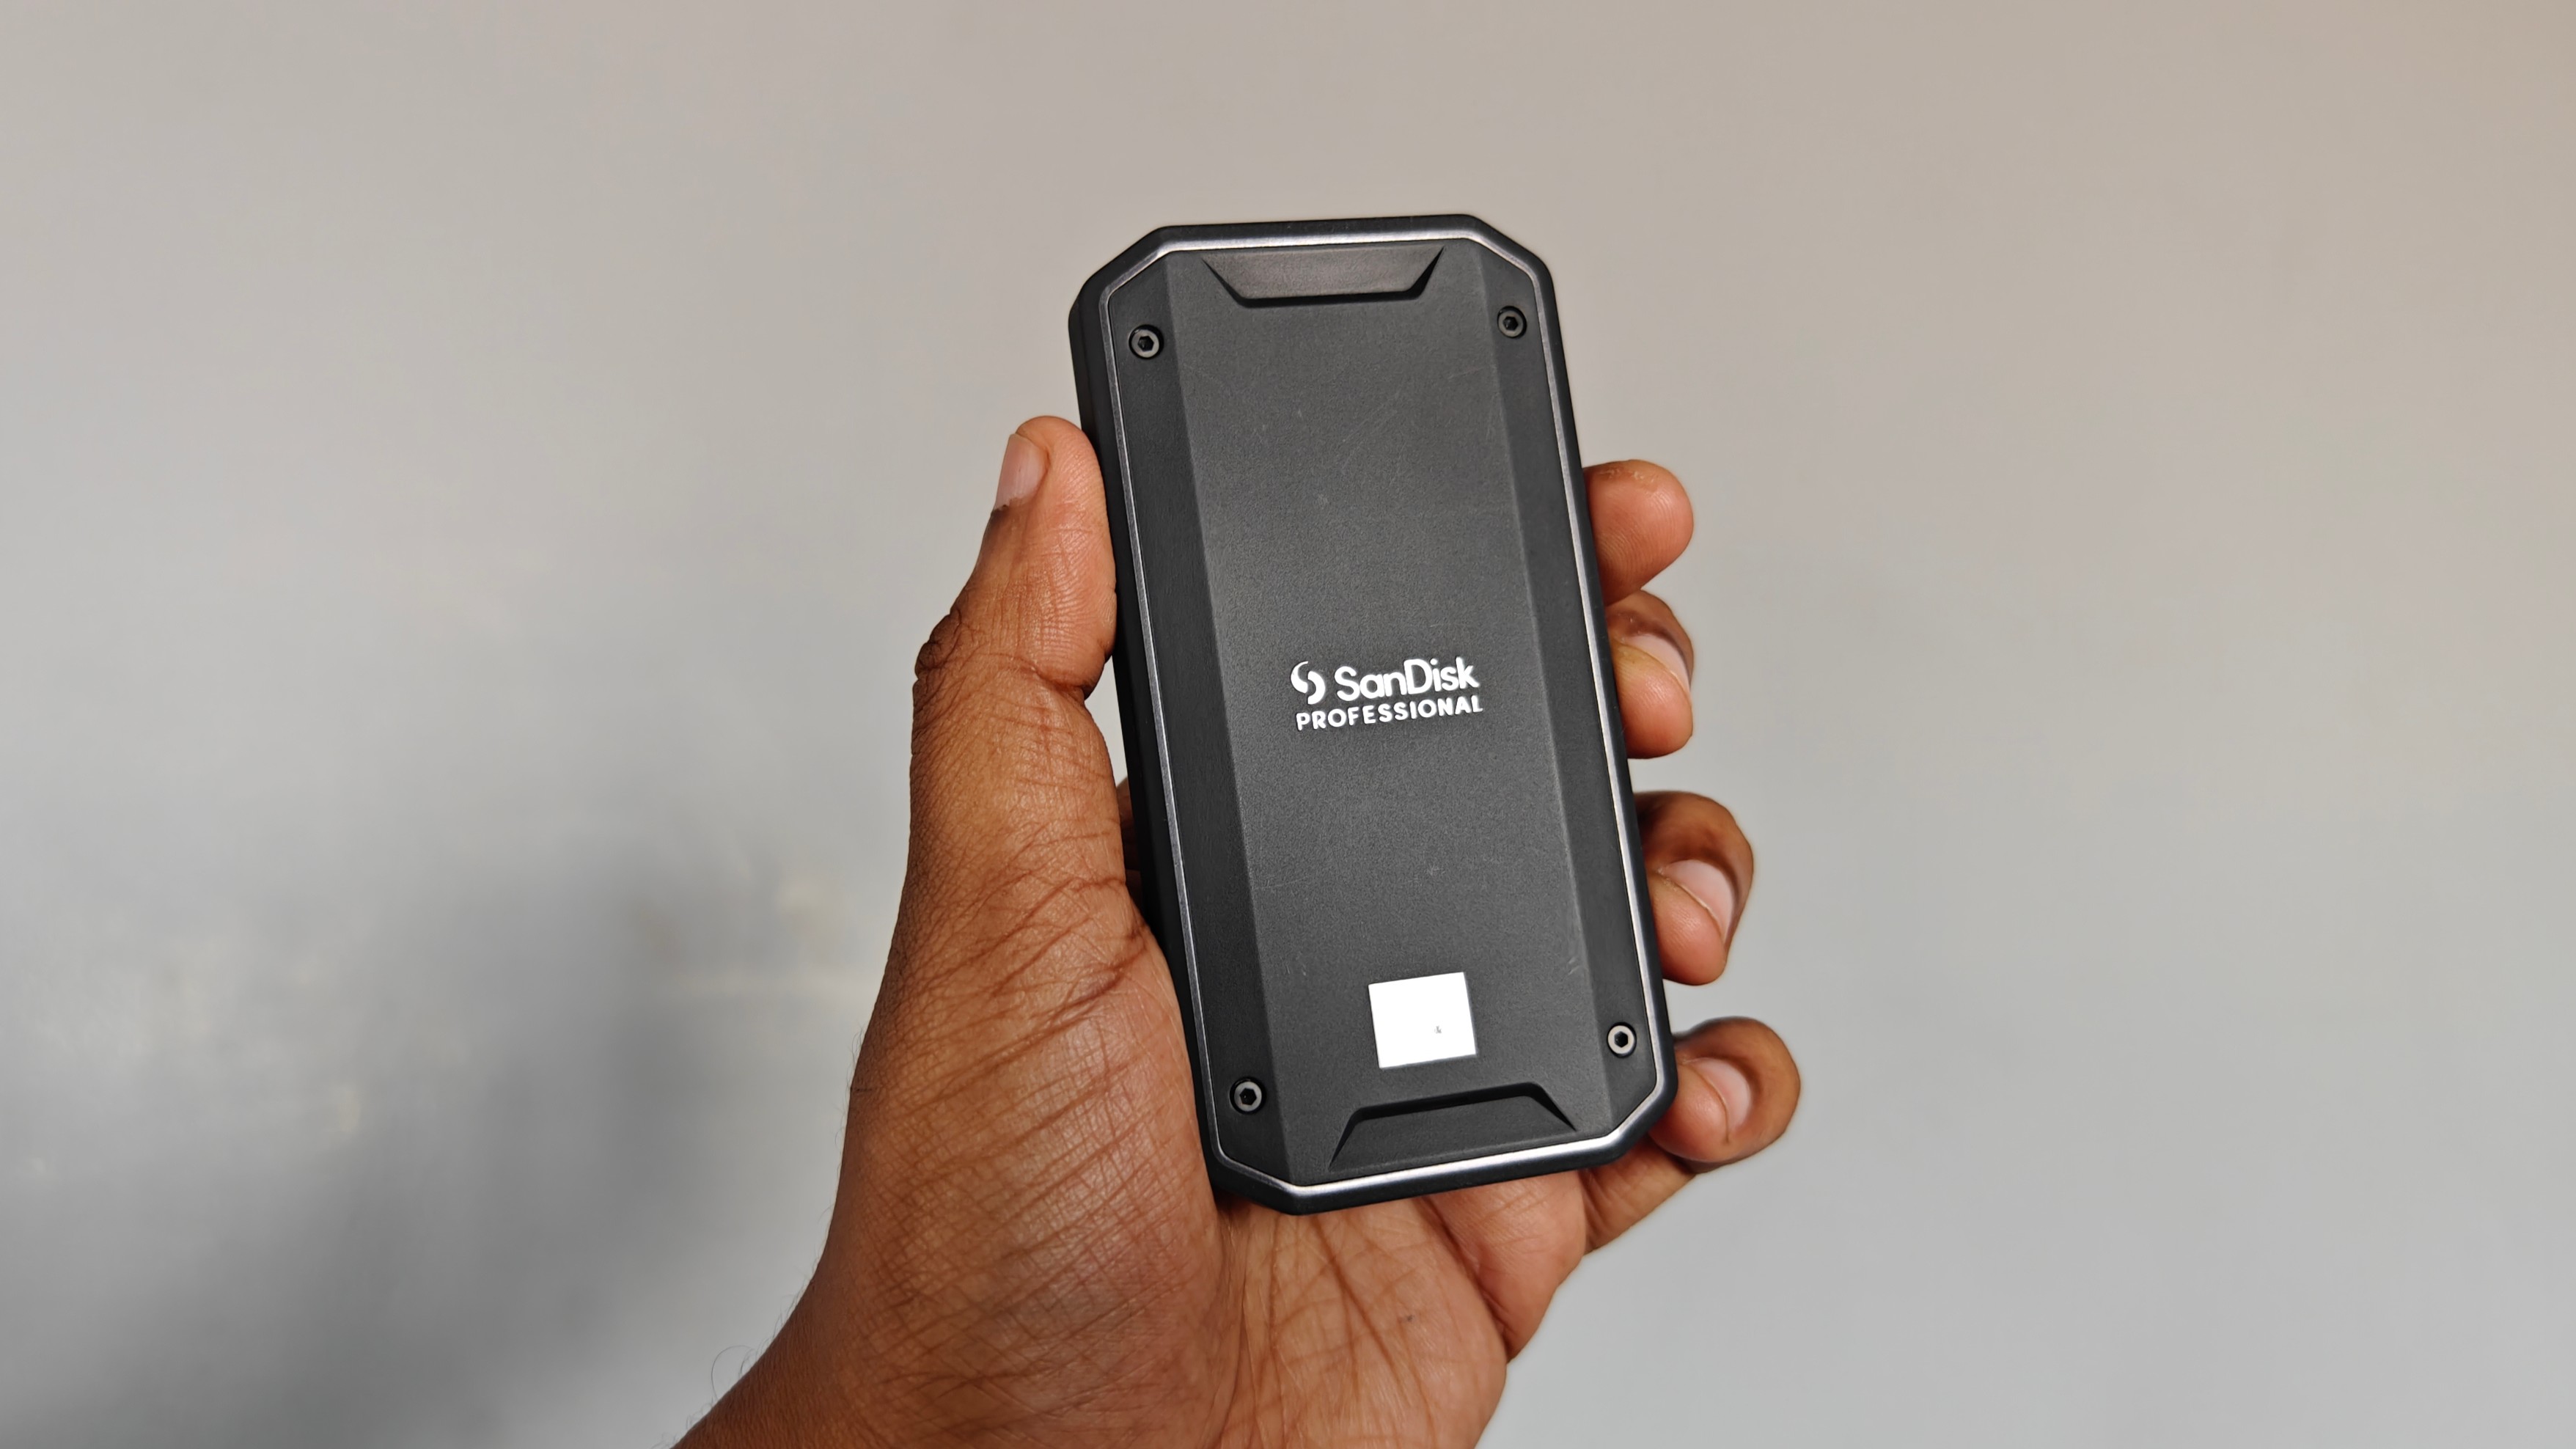 SanDisk Professional PRO-G40 Thunderbolt / USB Dual-Mode Portable SSD Review